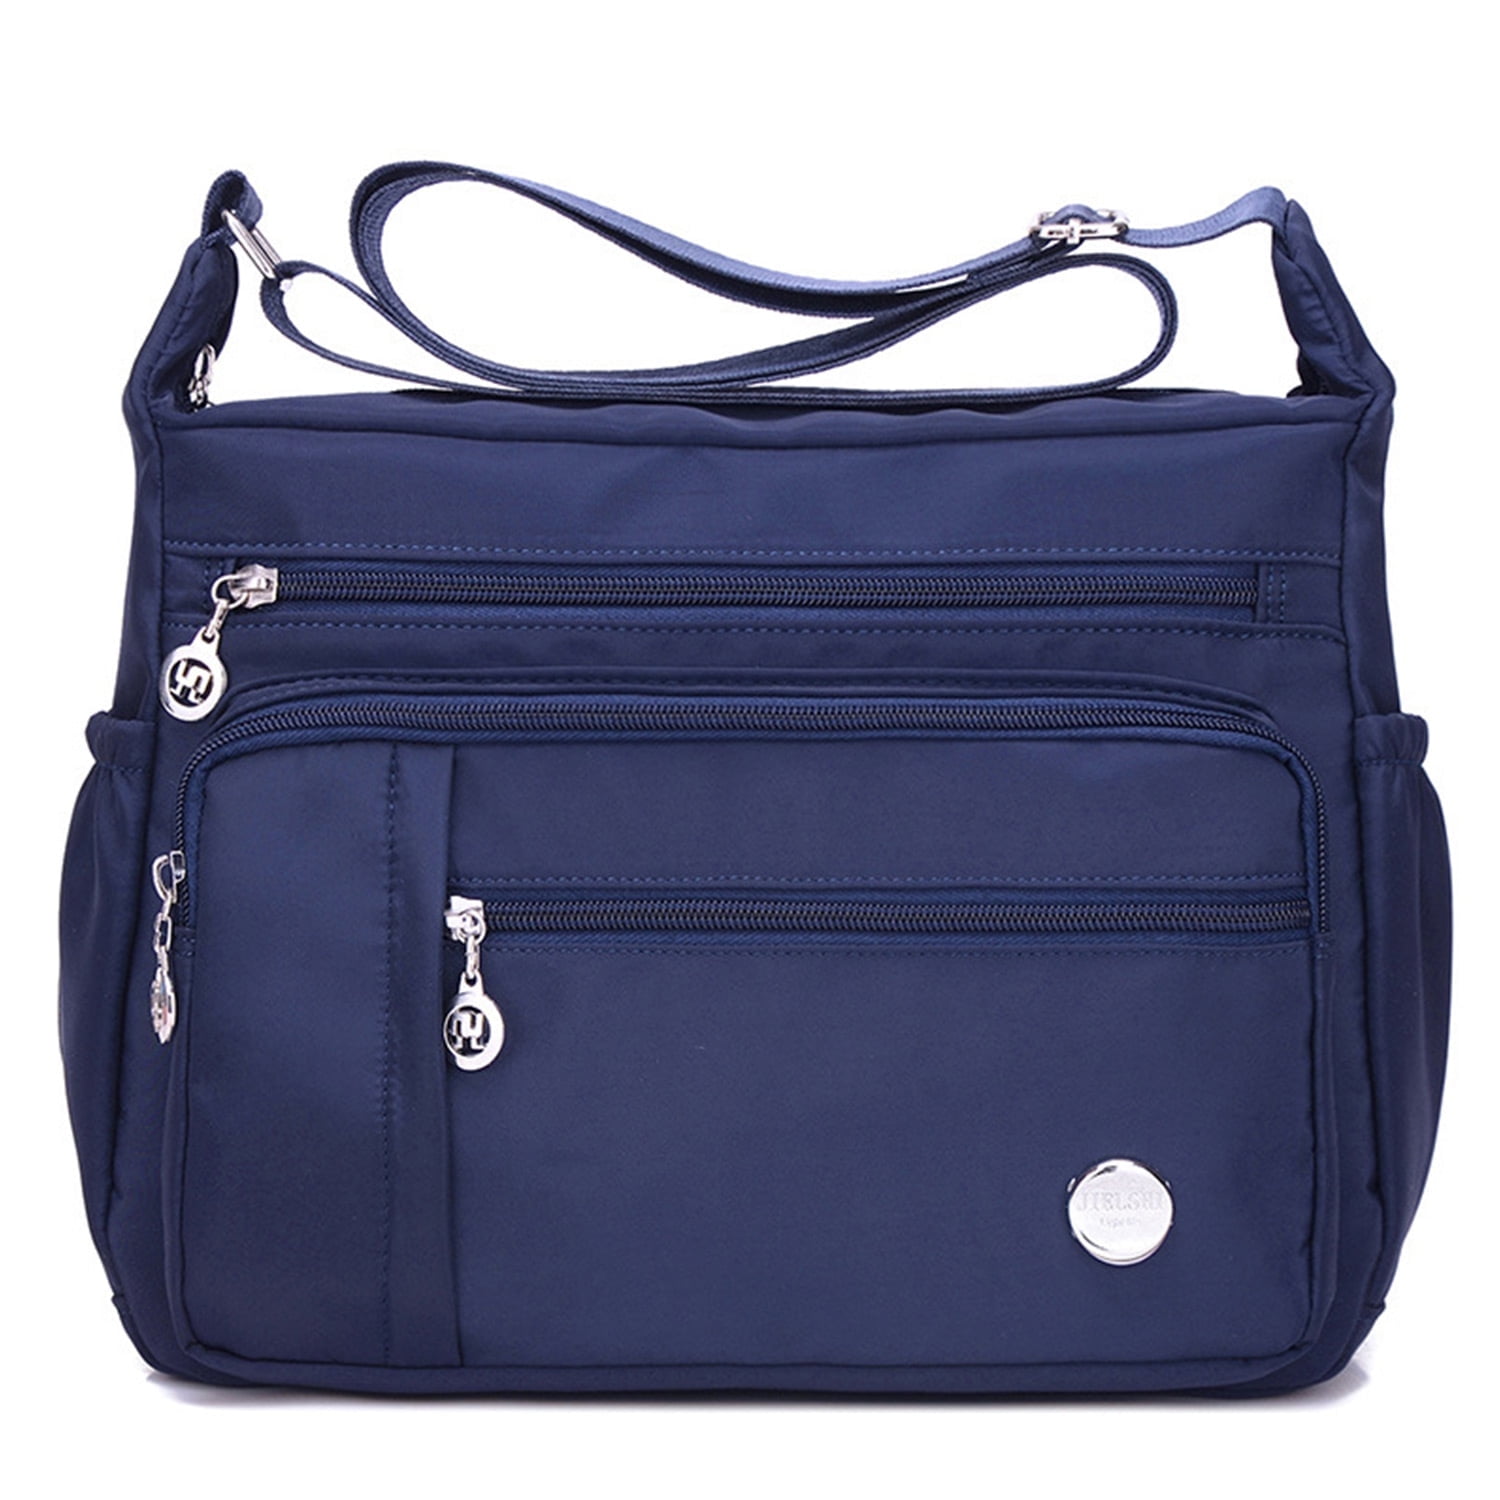 Buy Crossbody Bags for Women Shoulder Handbags Women's Cross Body Bag Purses  Small Leather Purse, Blue, Classic at Amazon.in